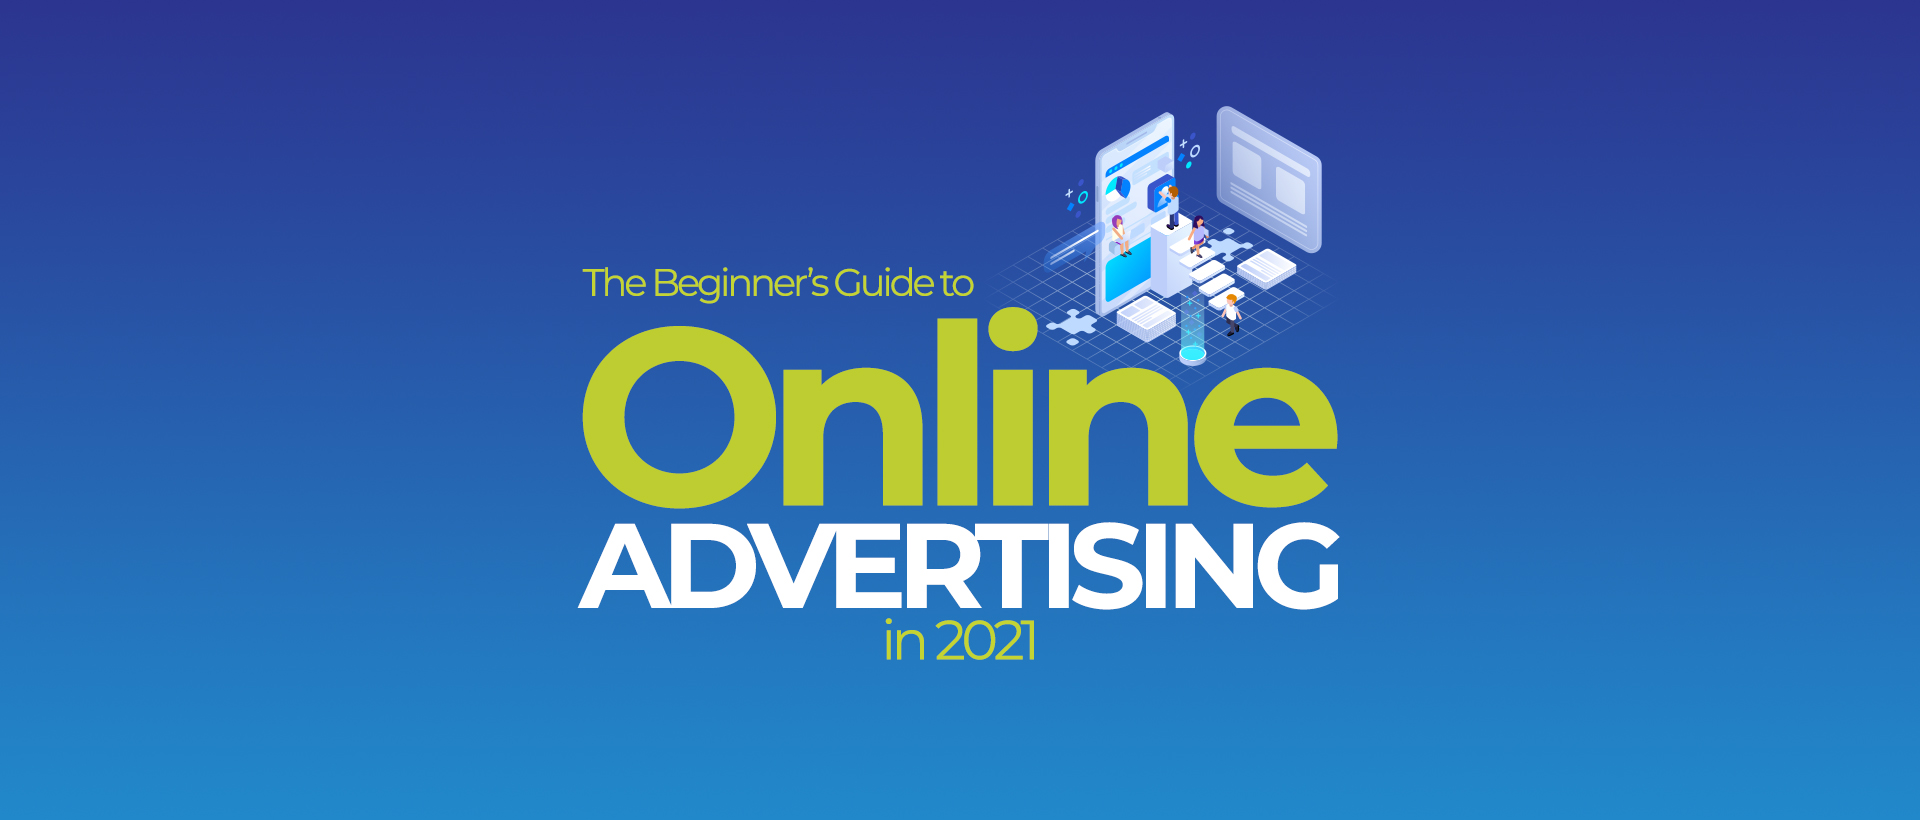 The Beginner’s Guide to Online Advertising in 2021